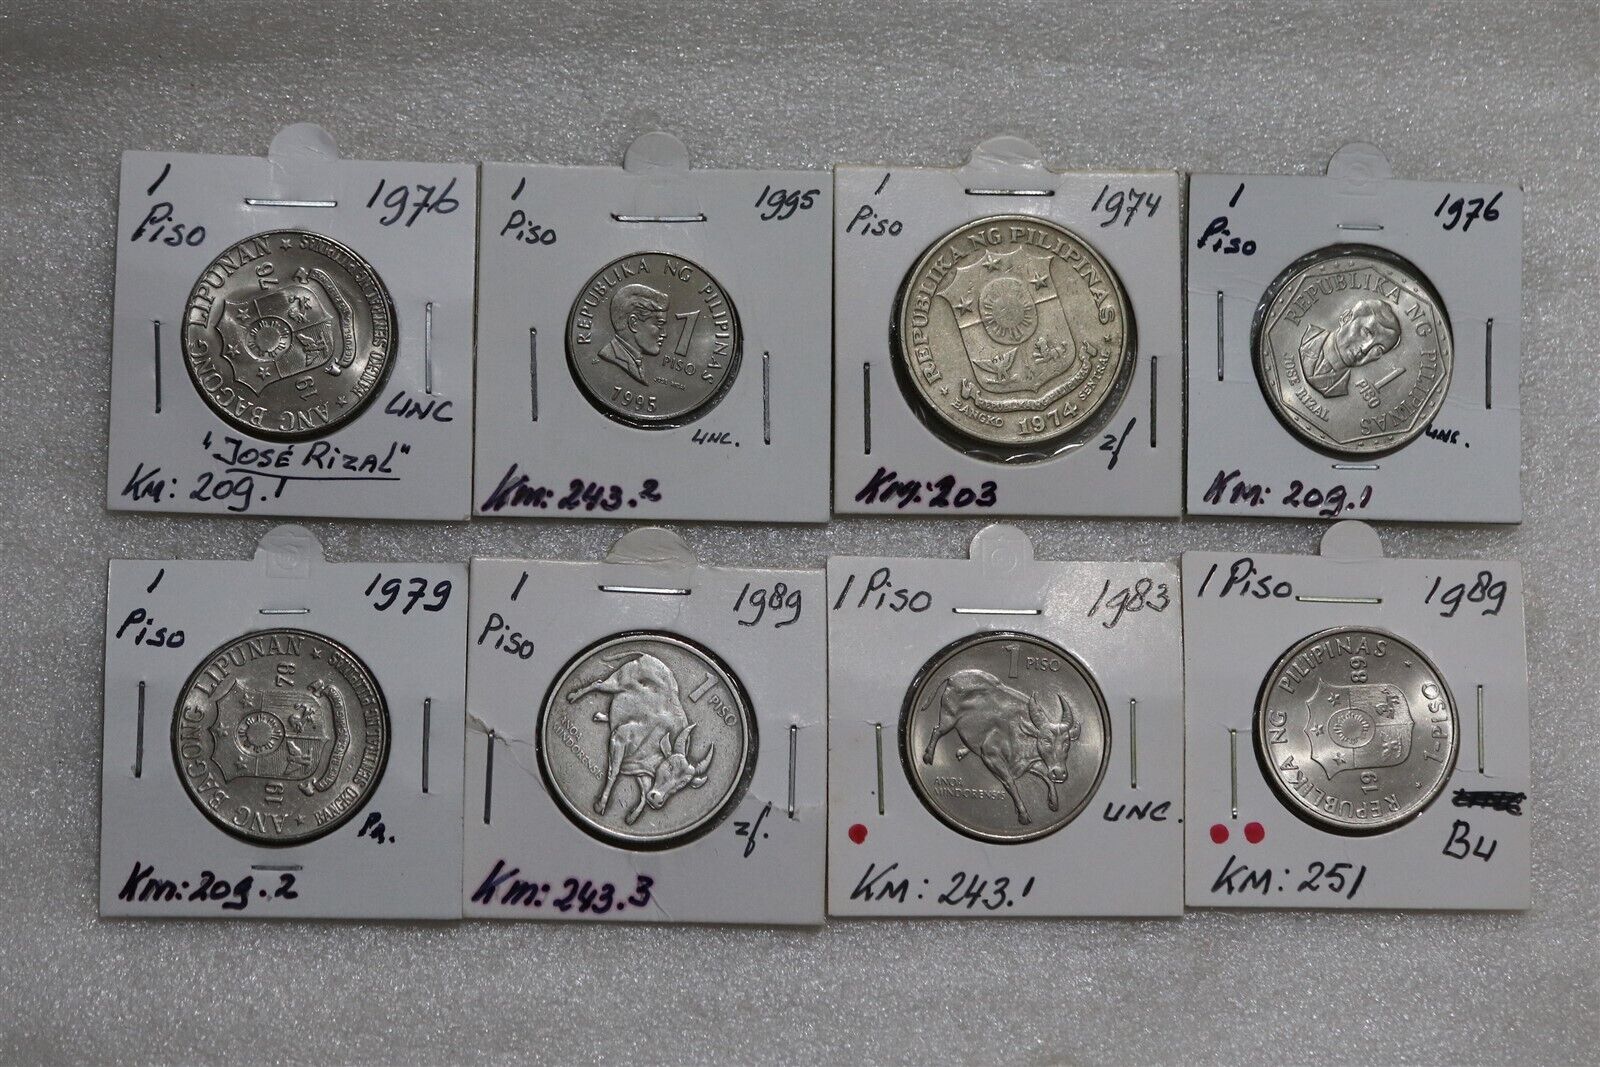 PHILIPPINES - 1 PISO - 8 COINS COLLECTION B49 #1606